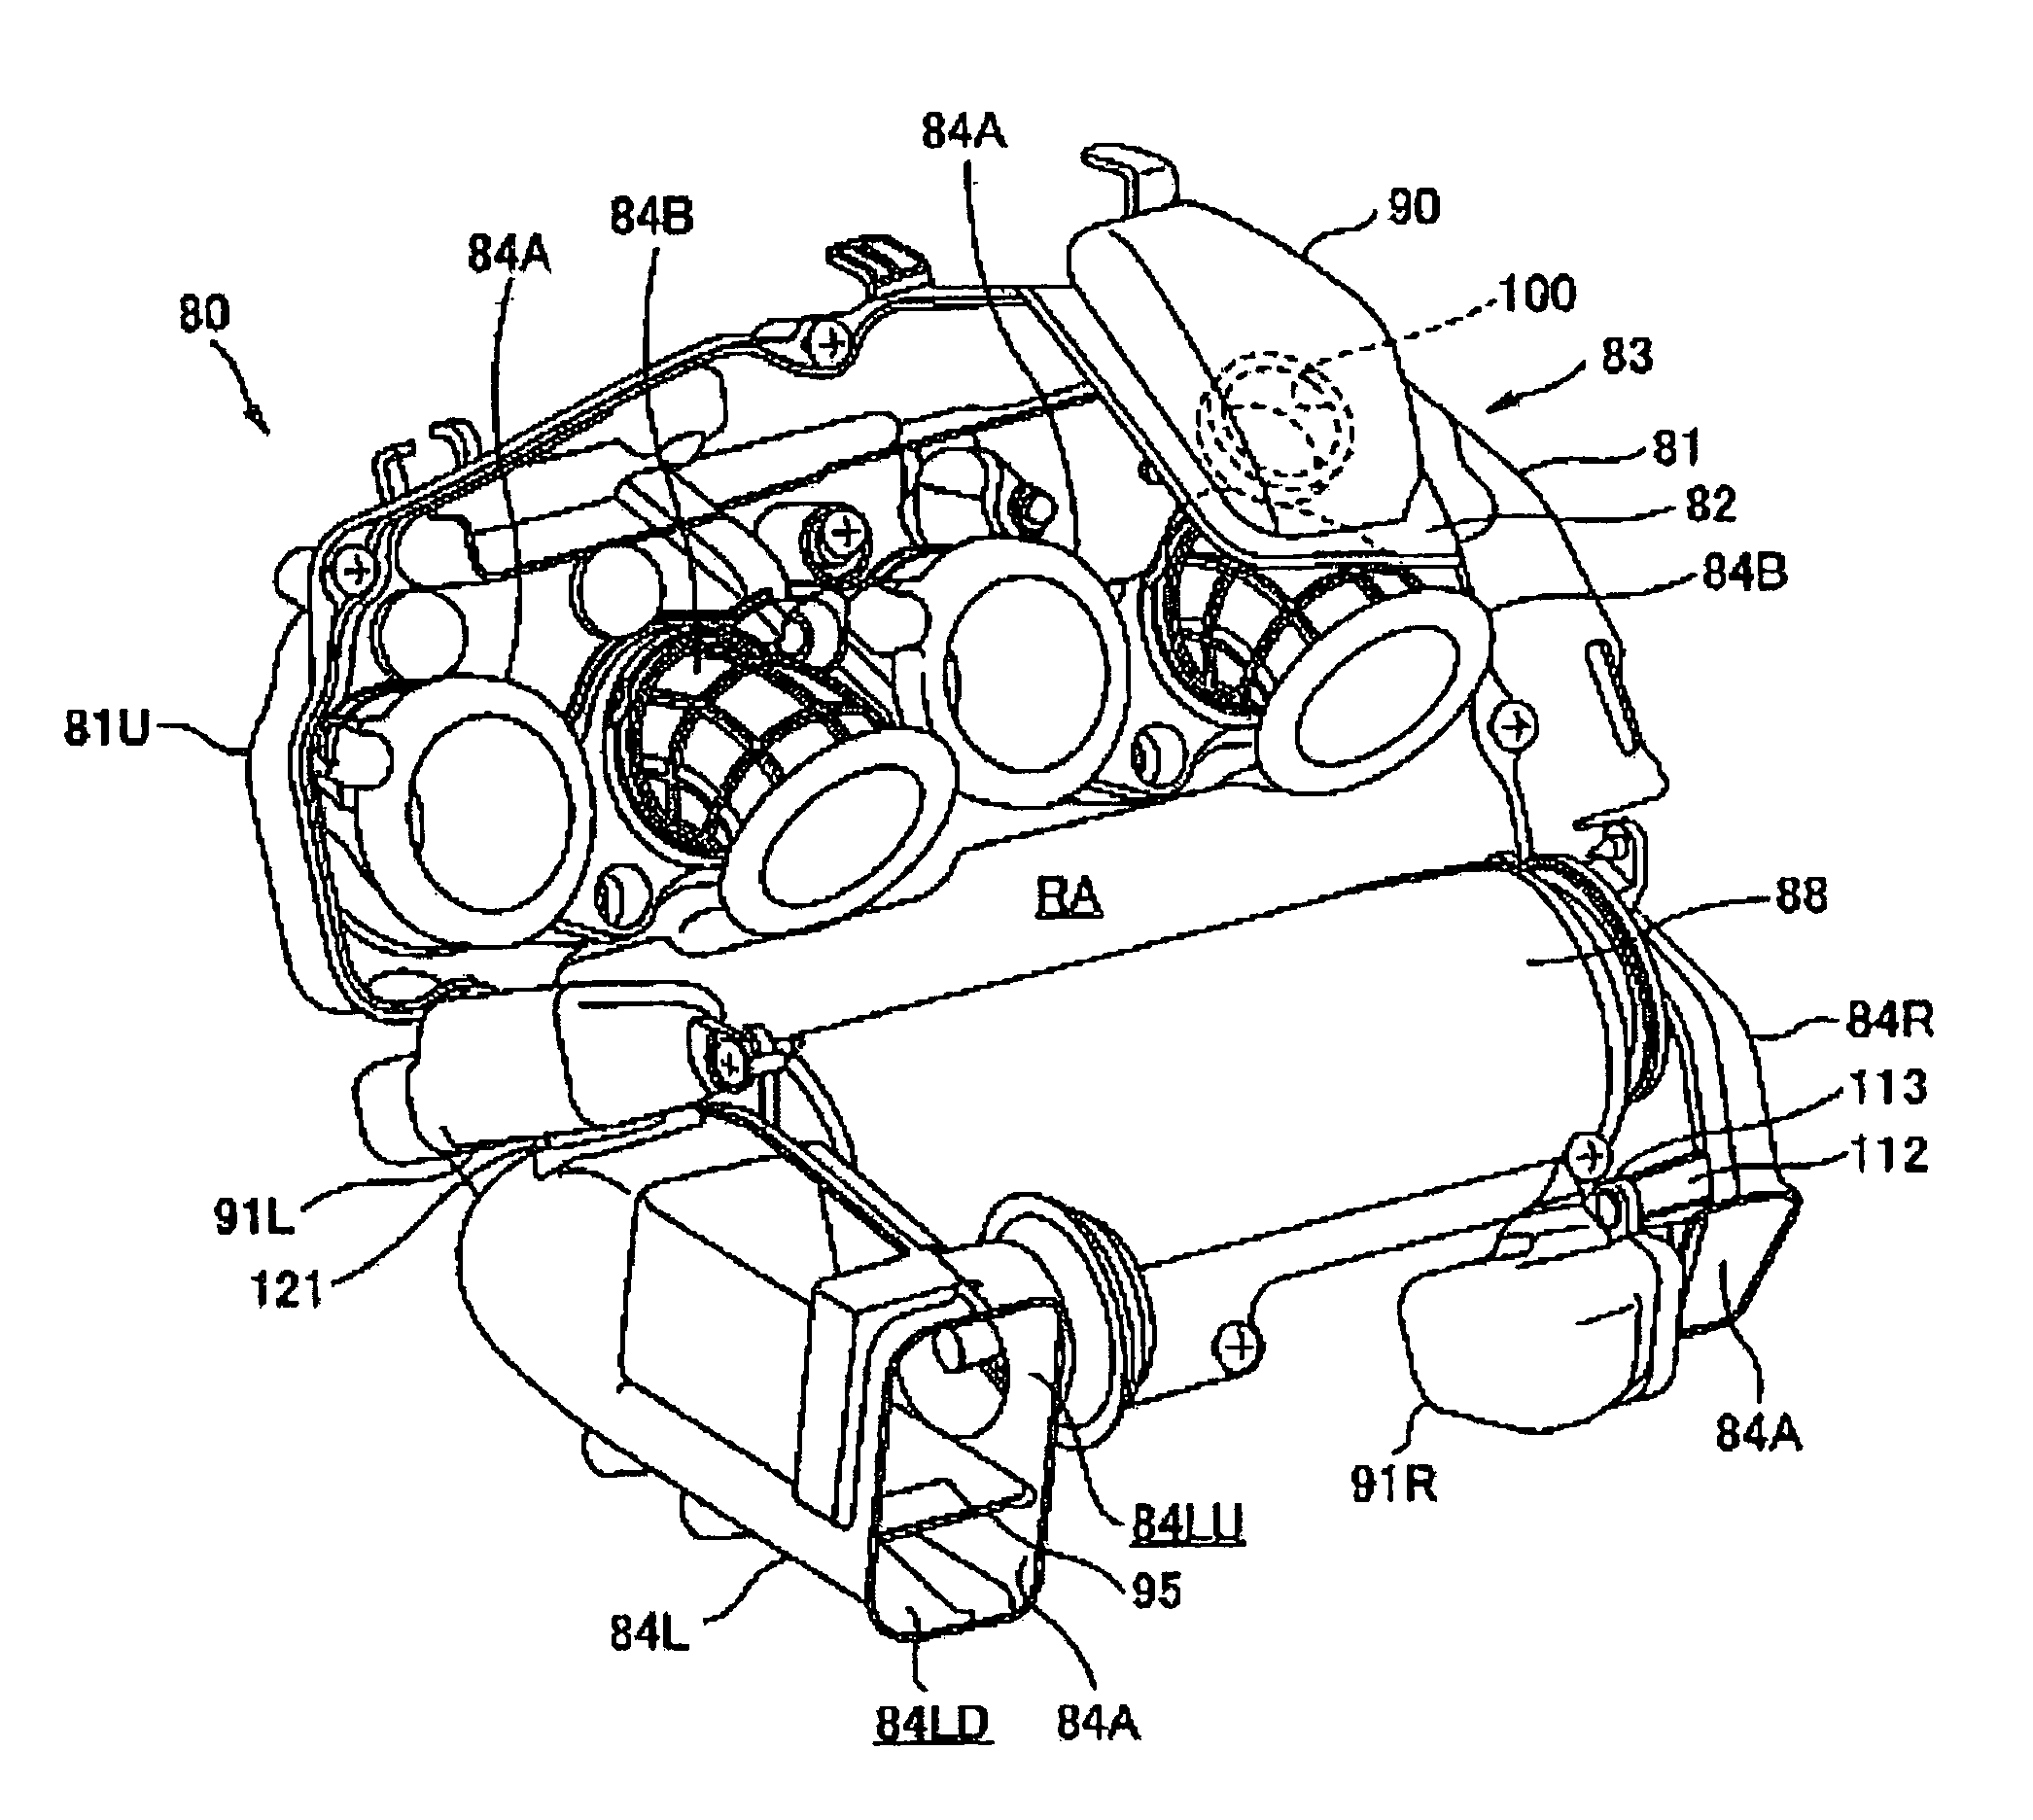 Intake device for a motorcycle